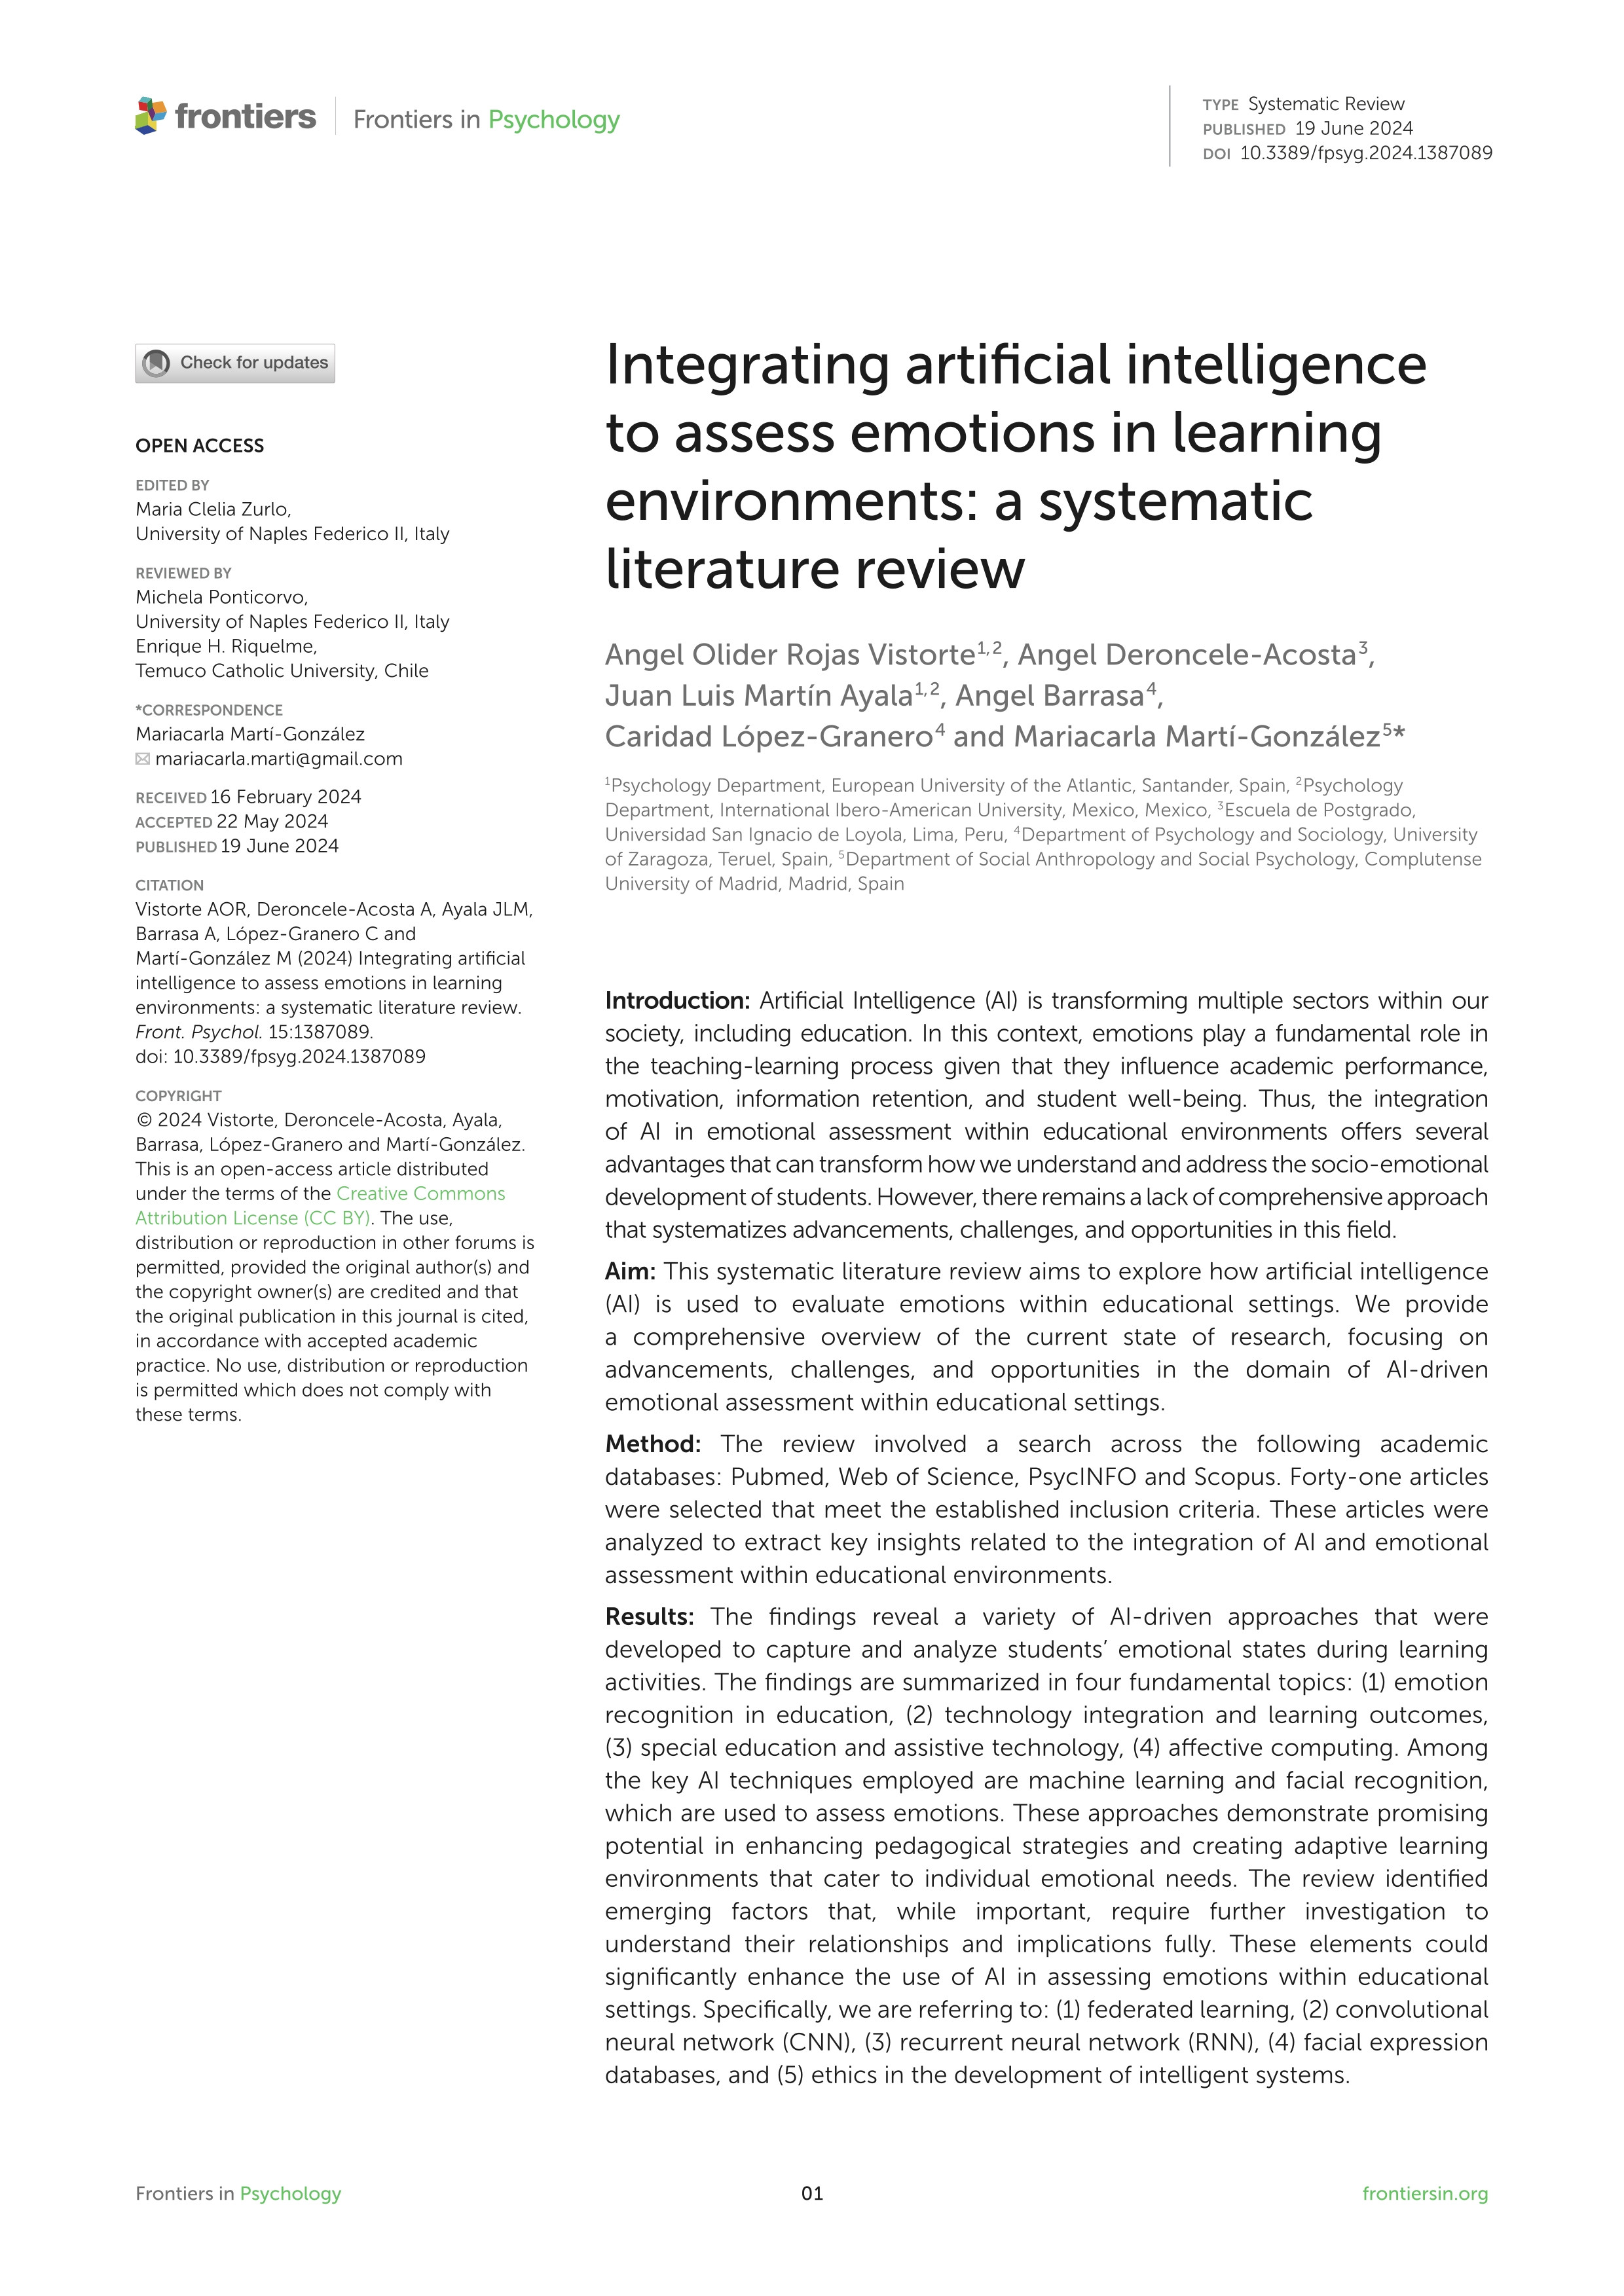 Integrating artificial intelligence to assess emotions in learning environments: a systematic literature review